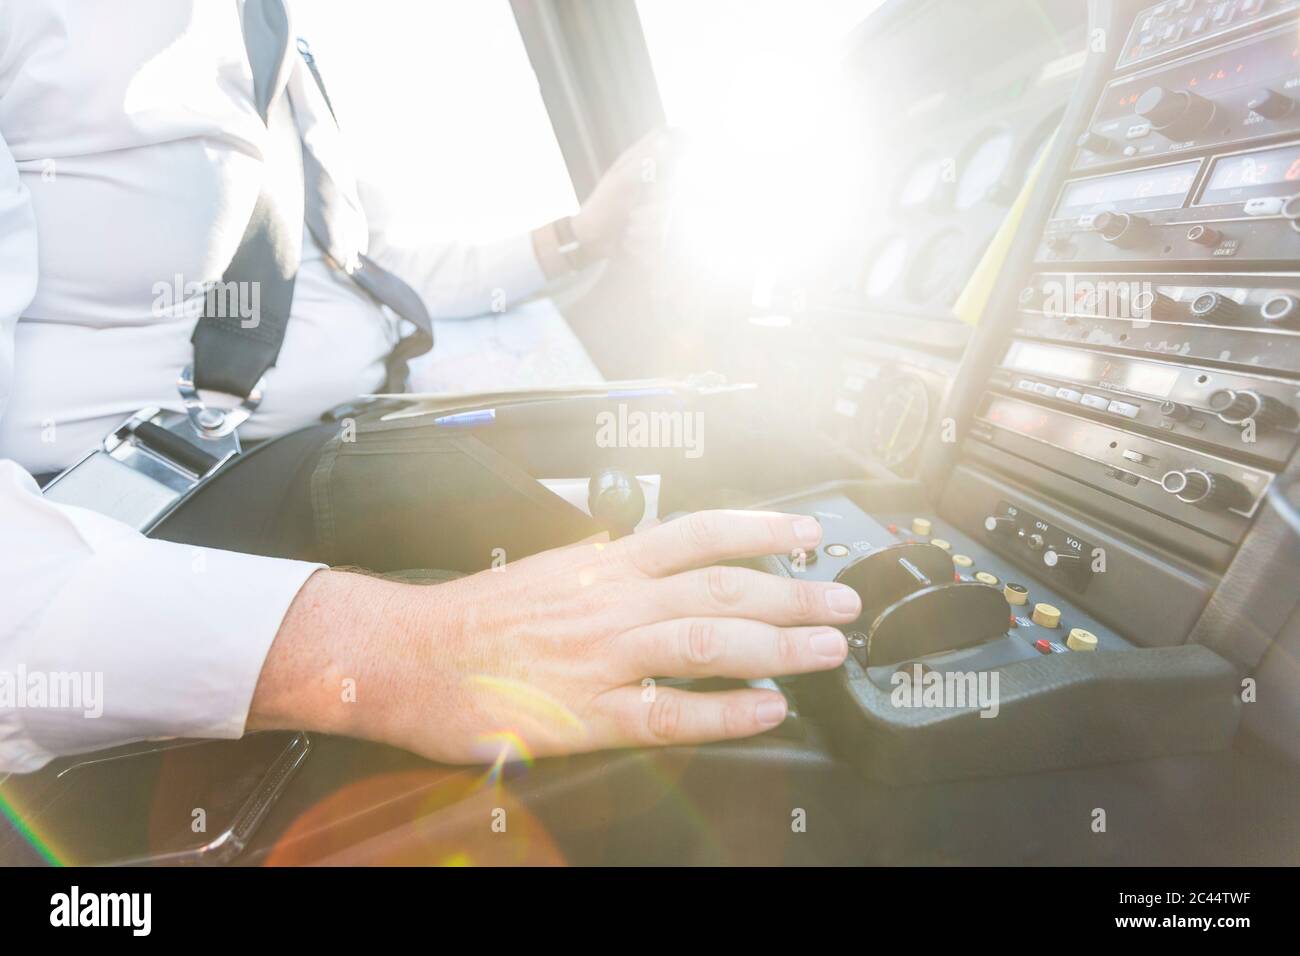 Pilot flying in sports plane, using control wheel Stock Photo